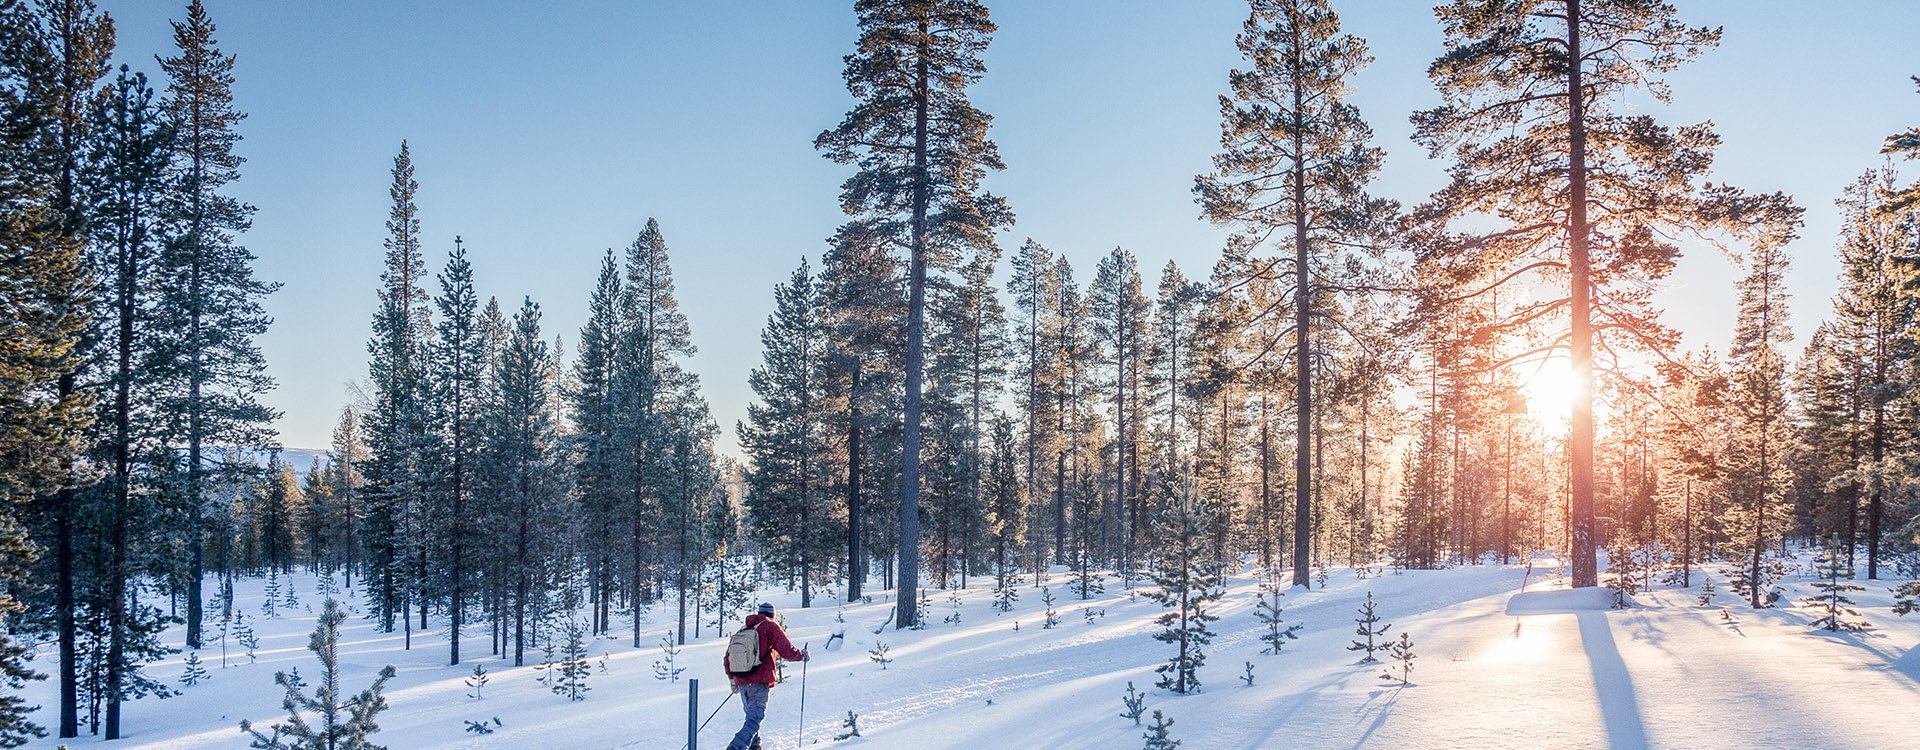 cross-country skiing on a track in beautiful nordic winter wonderland scenery in Scandinavia with scenic evening light at sunset in winter, Northern Europe